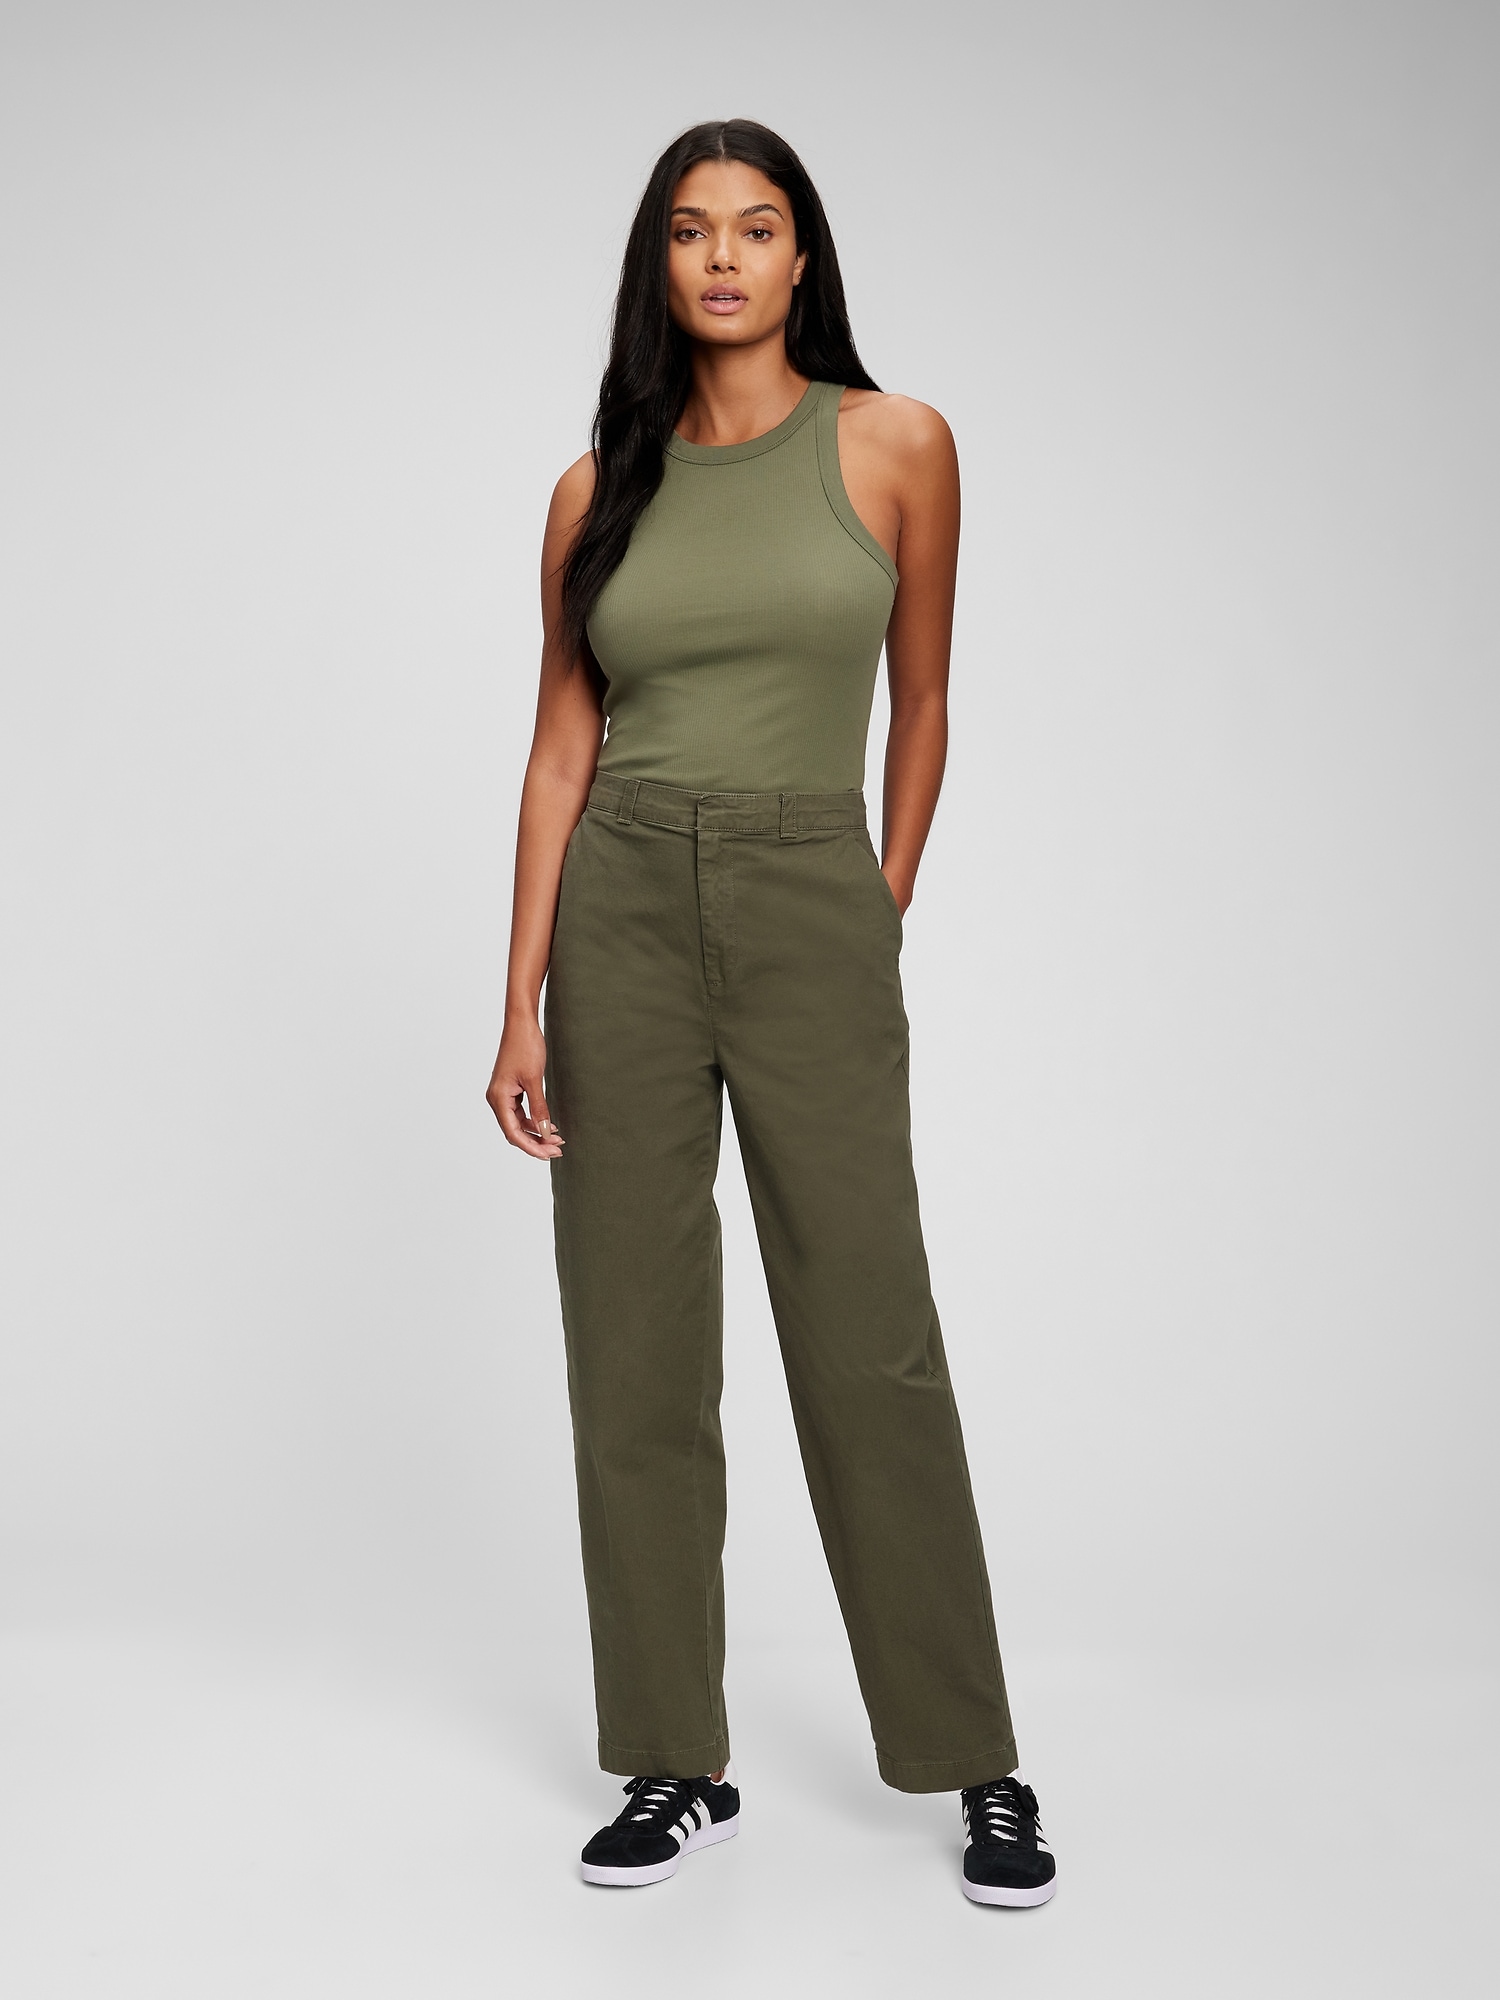 Two Ways to Wear LOFT Trousers - The Miller Affect | Khaki pants outfit  women, Slacks for women, Pants outfit work